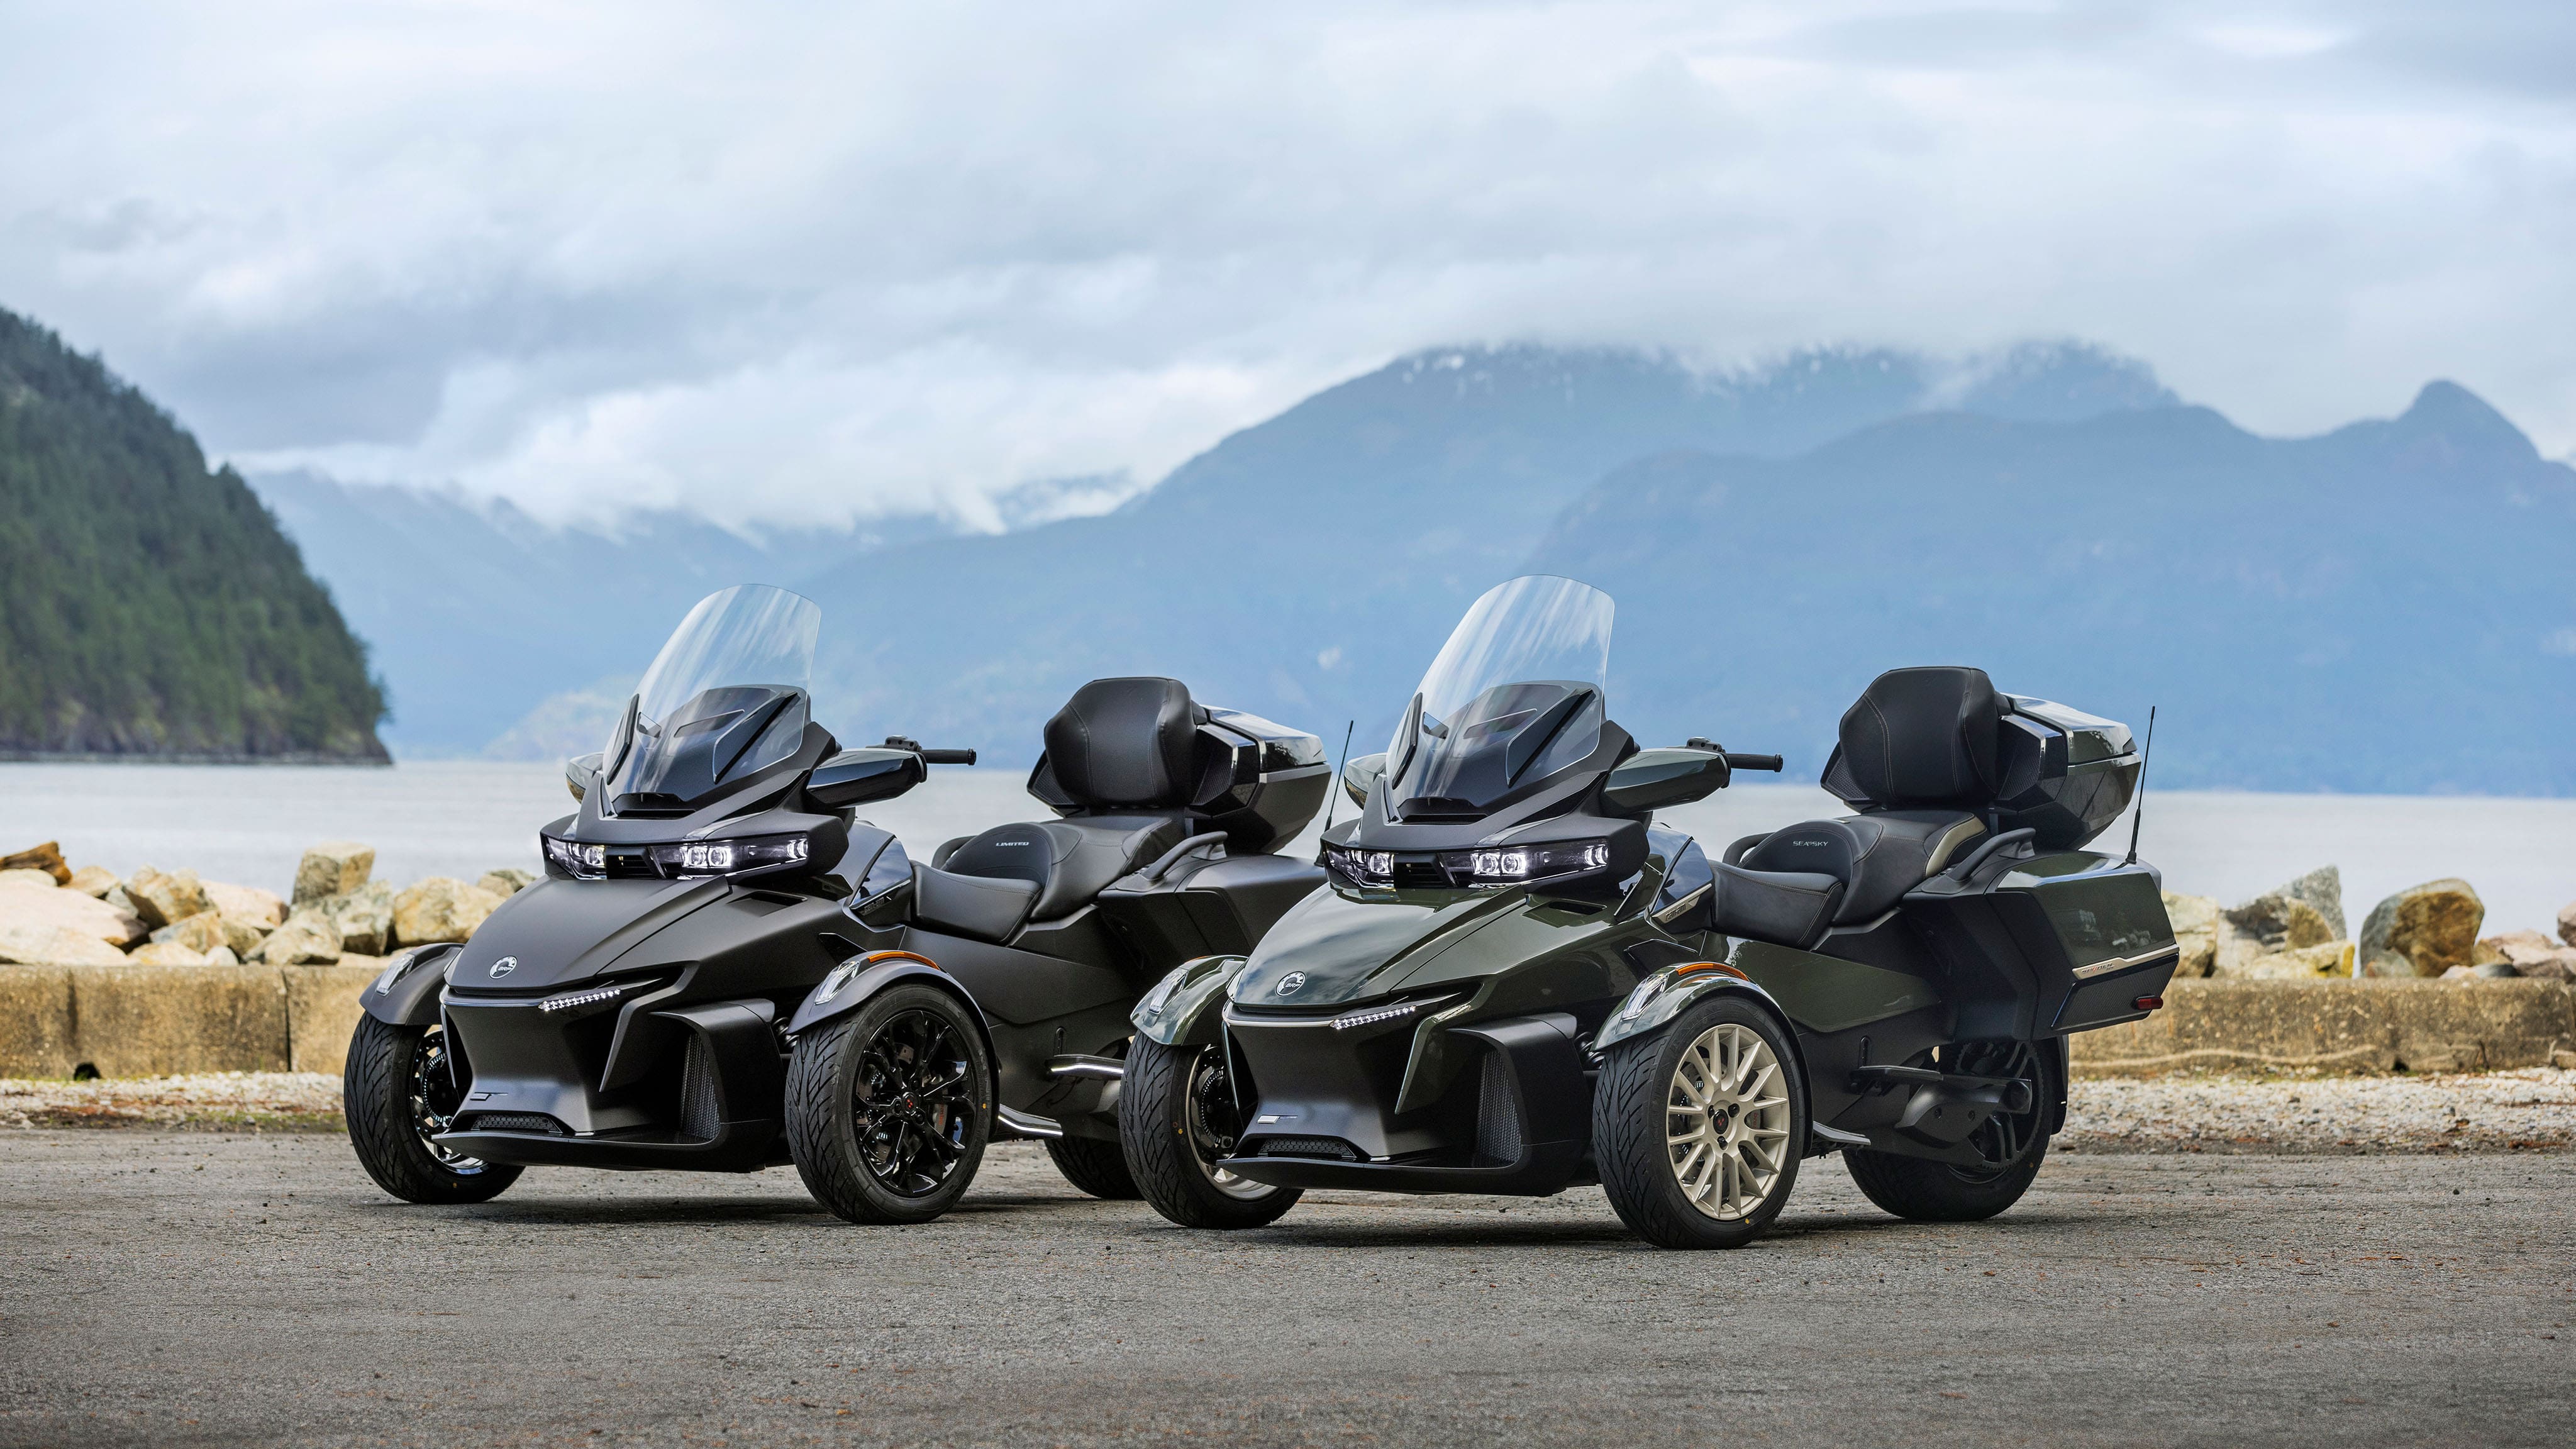 2023 Can-Am Spyder RT on the road